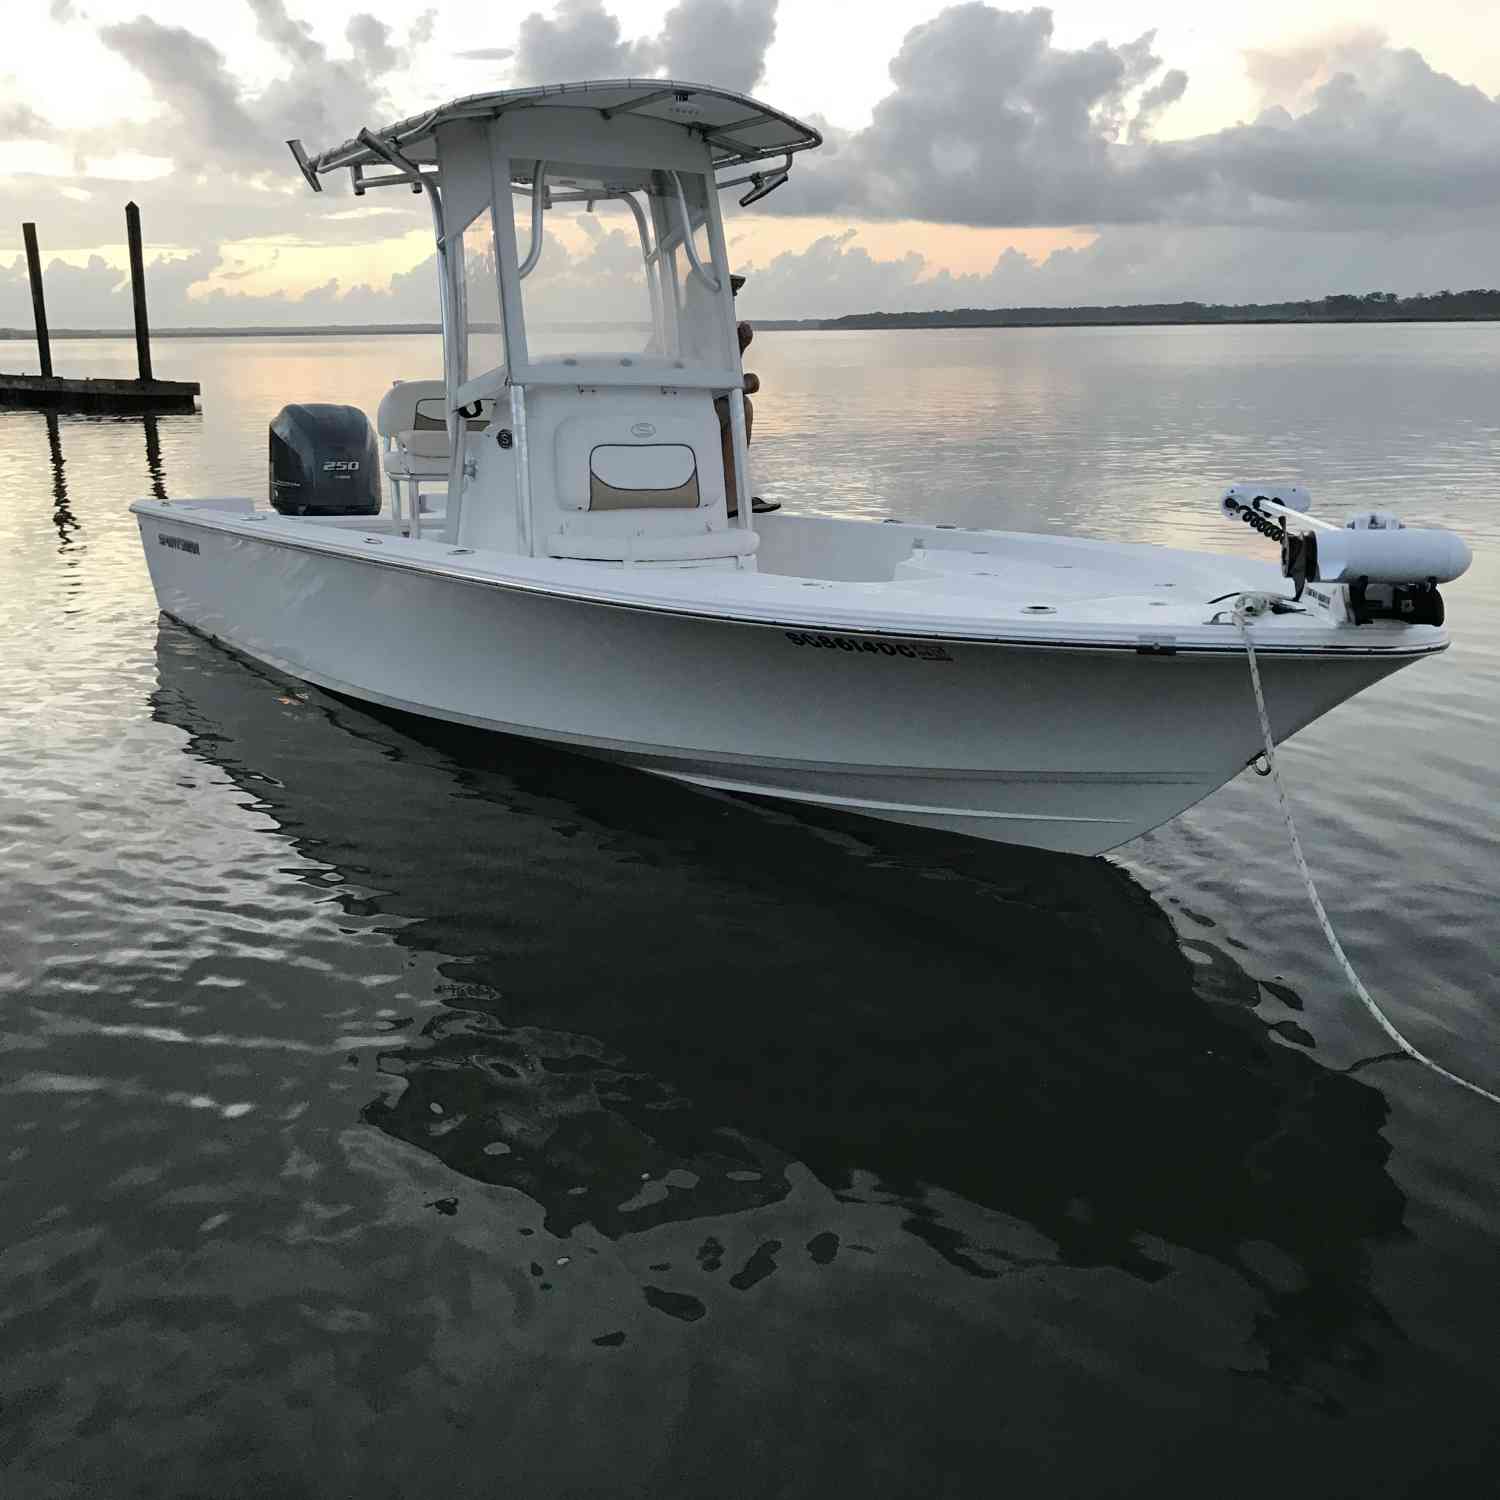 This photo was taken on the morning of sea trial that I purchased this 247 in Bluffton, SC. Nee...